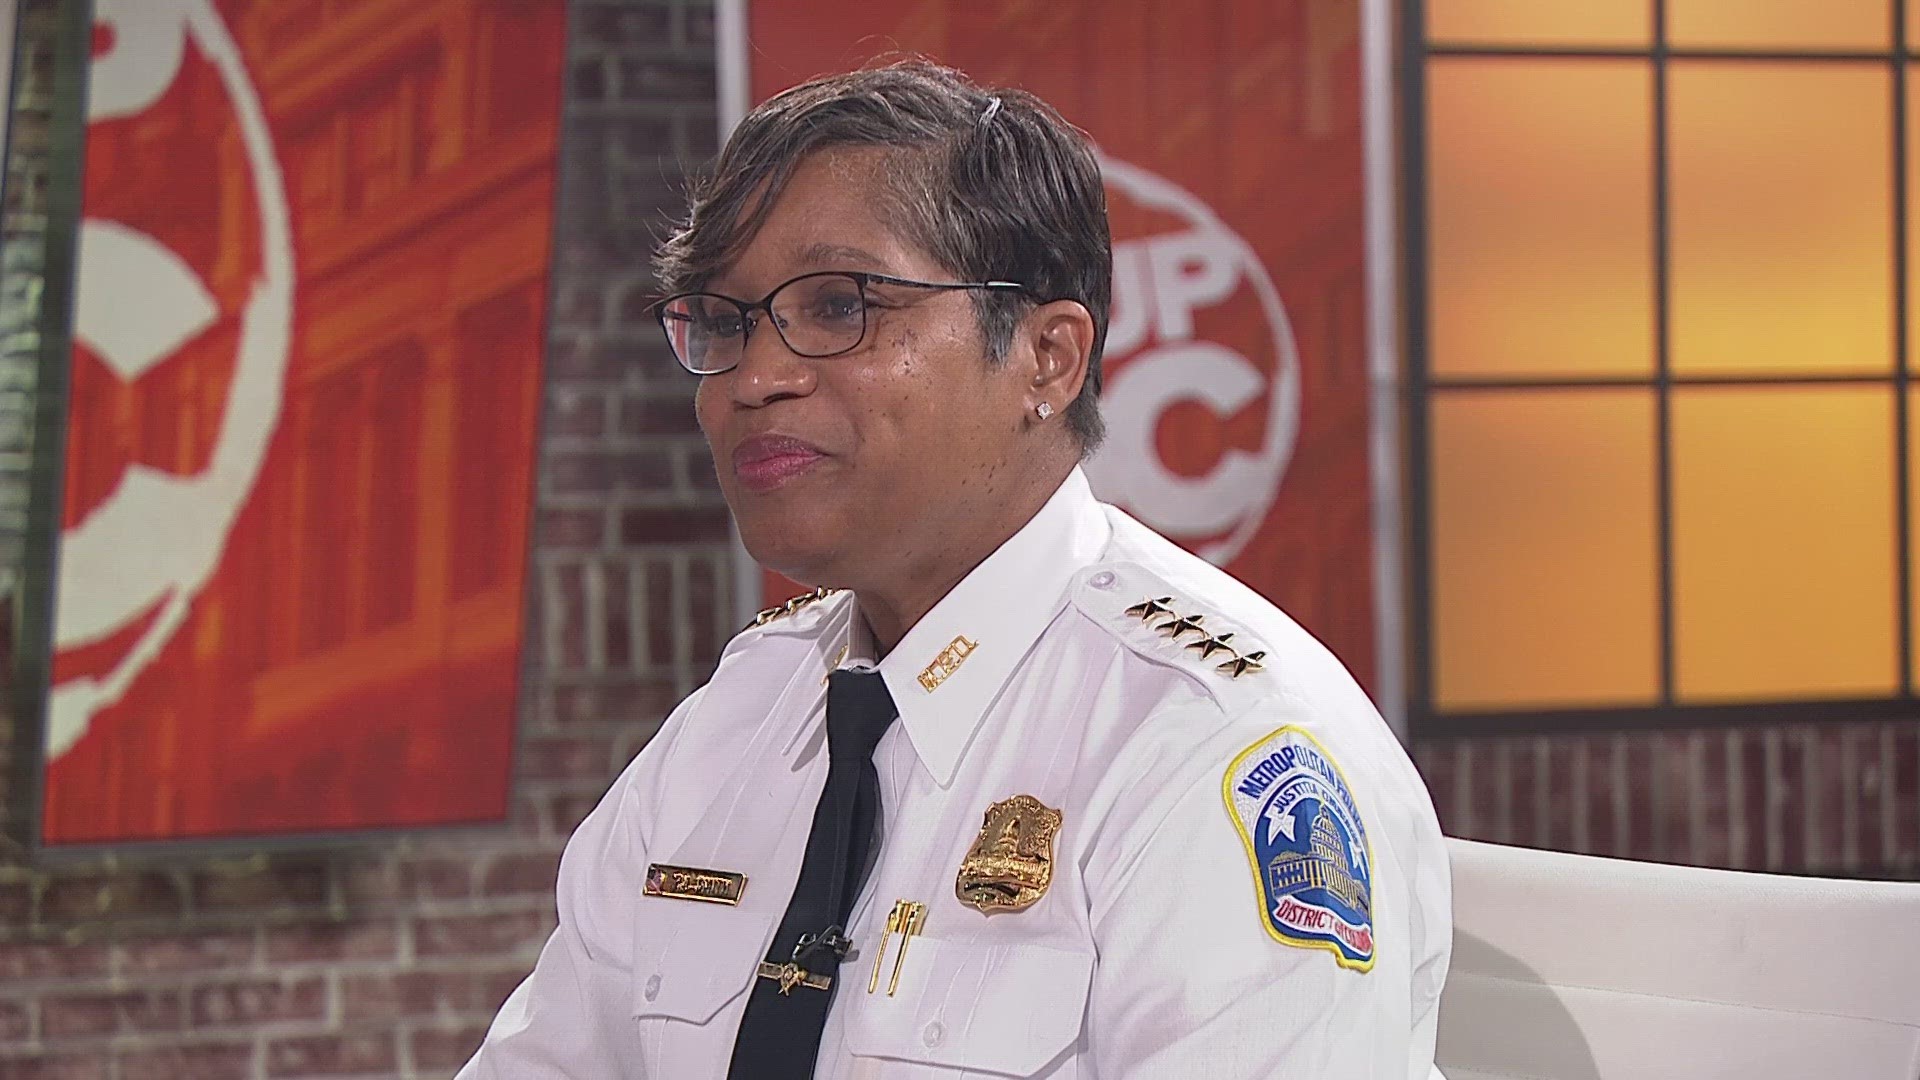 If confirmed, Smith would be the first Black woman to be chief of the Metropolitan Police Department.